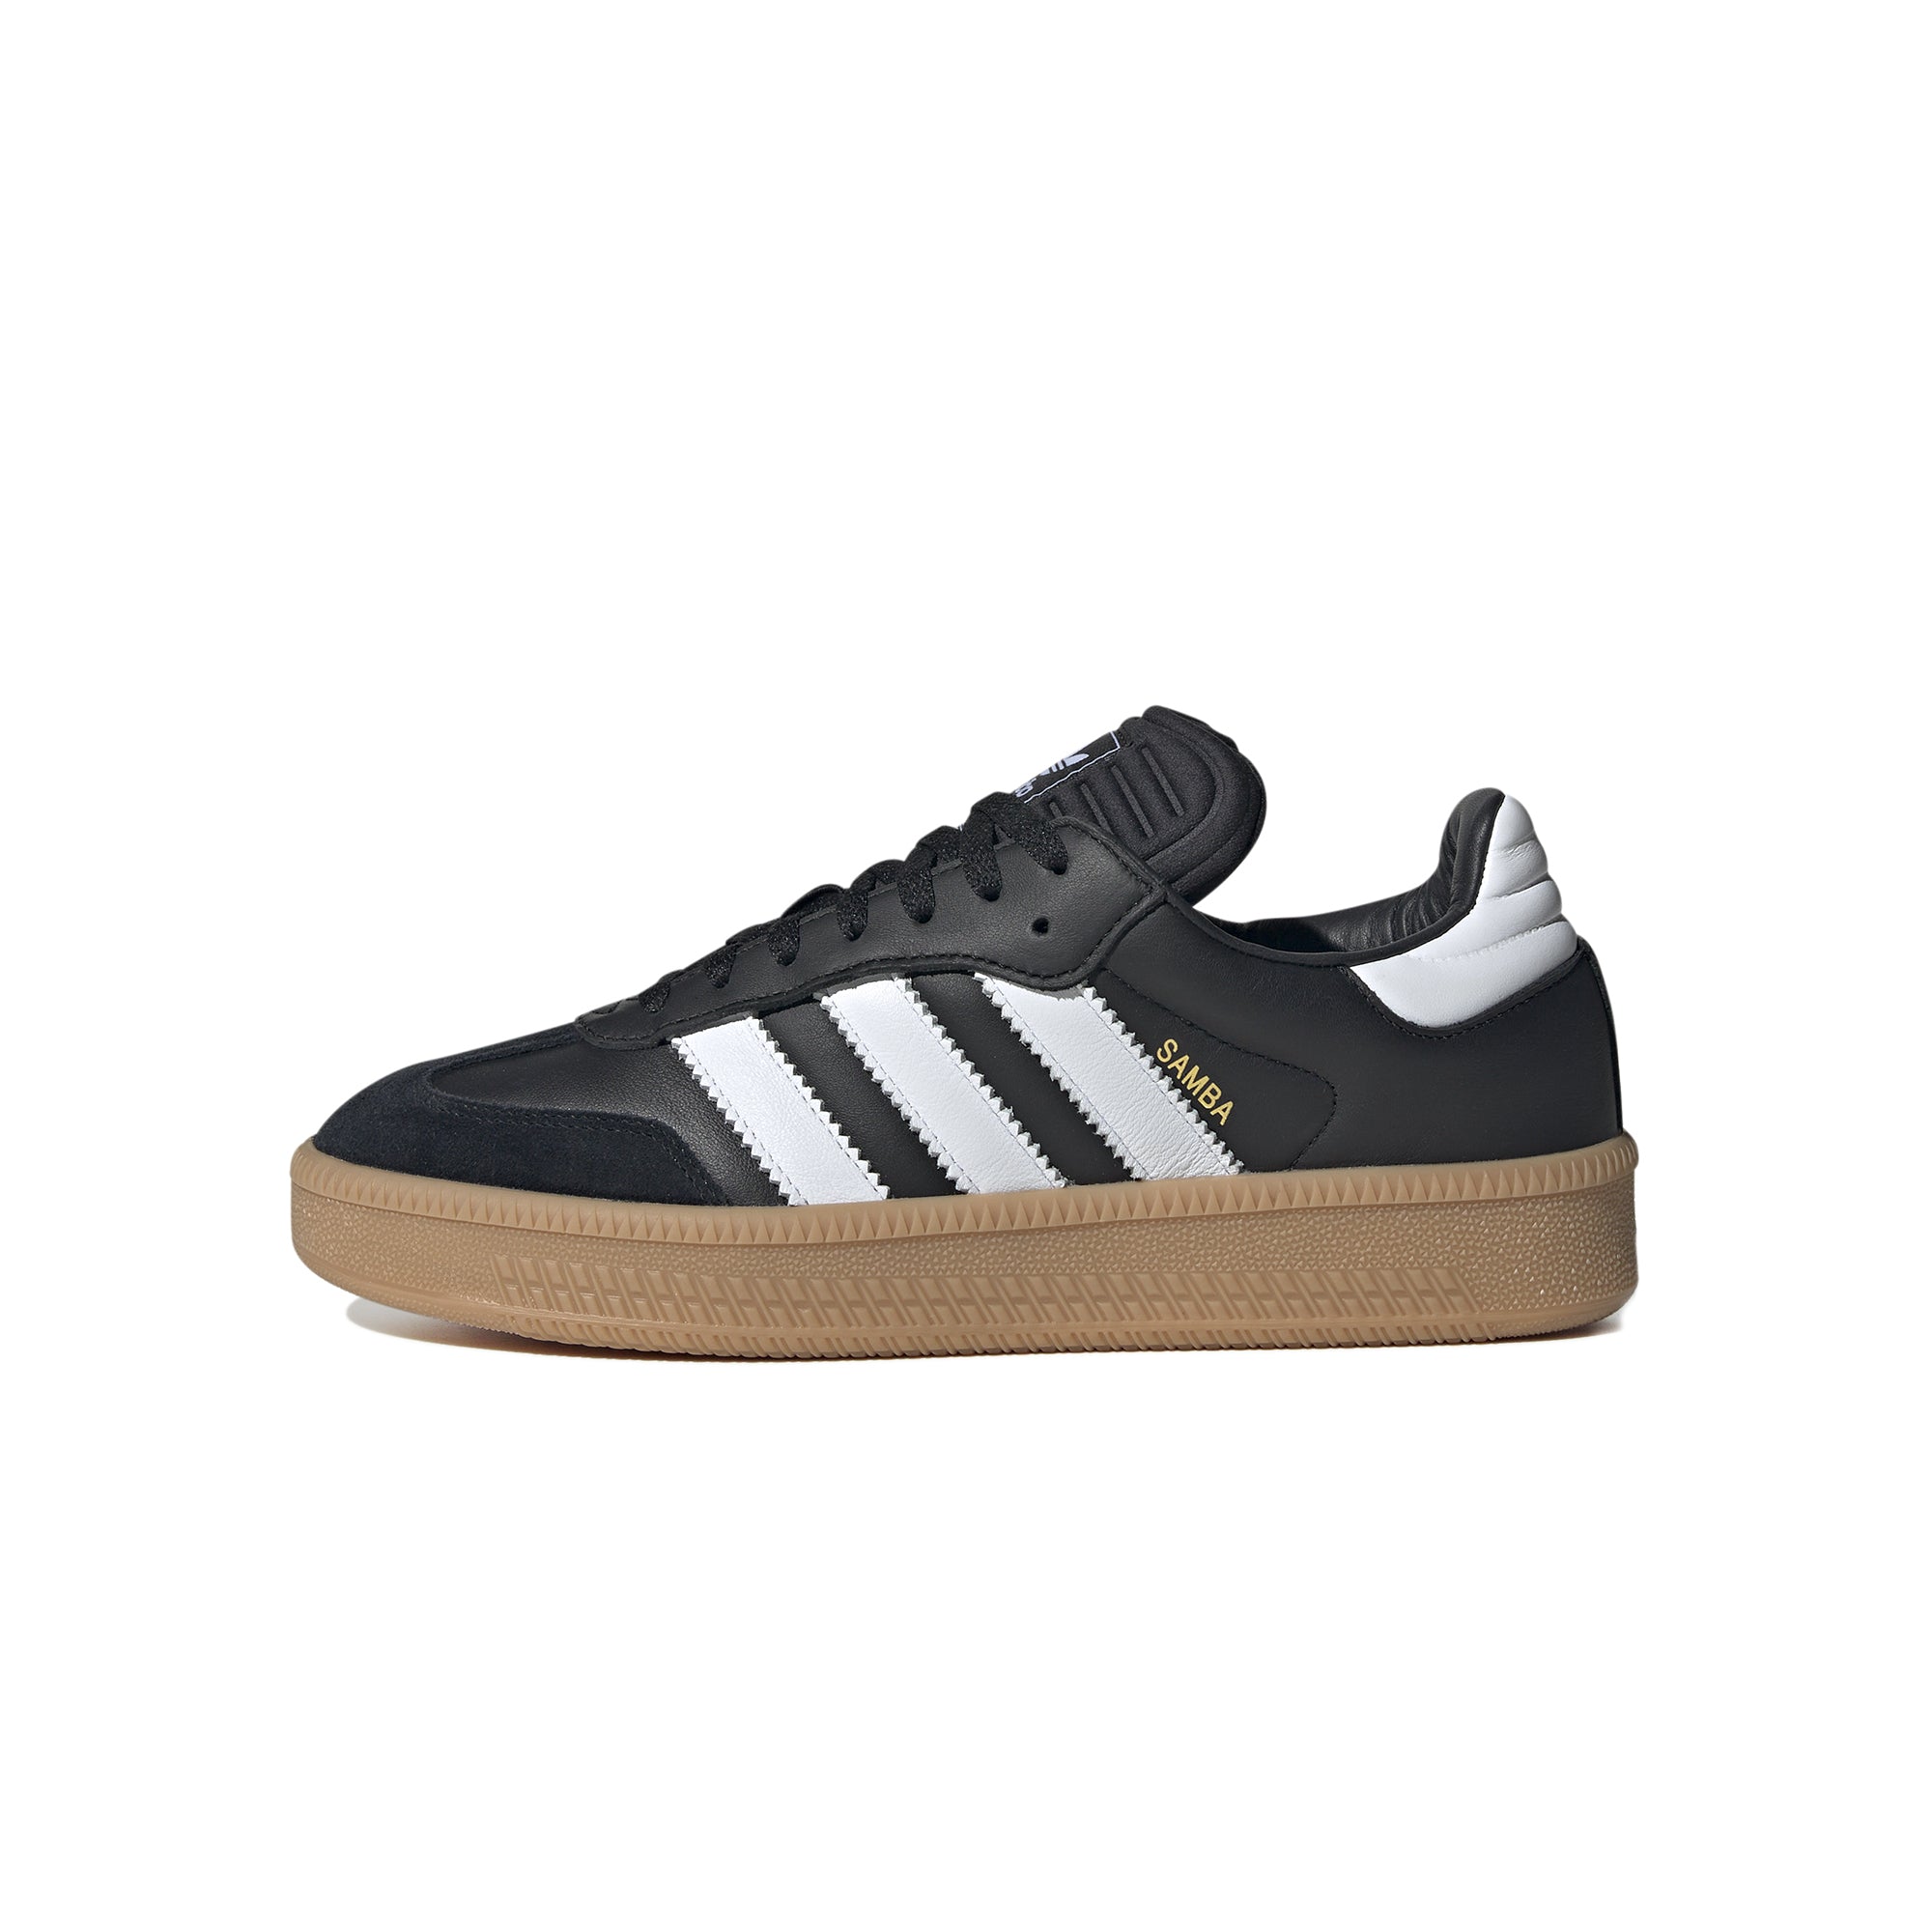 Adidas Samba XLG Shoes – Extra Butter